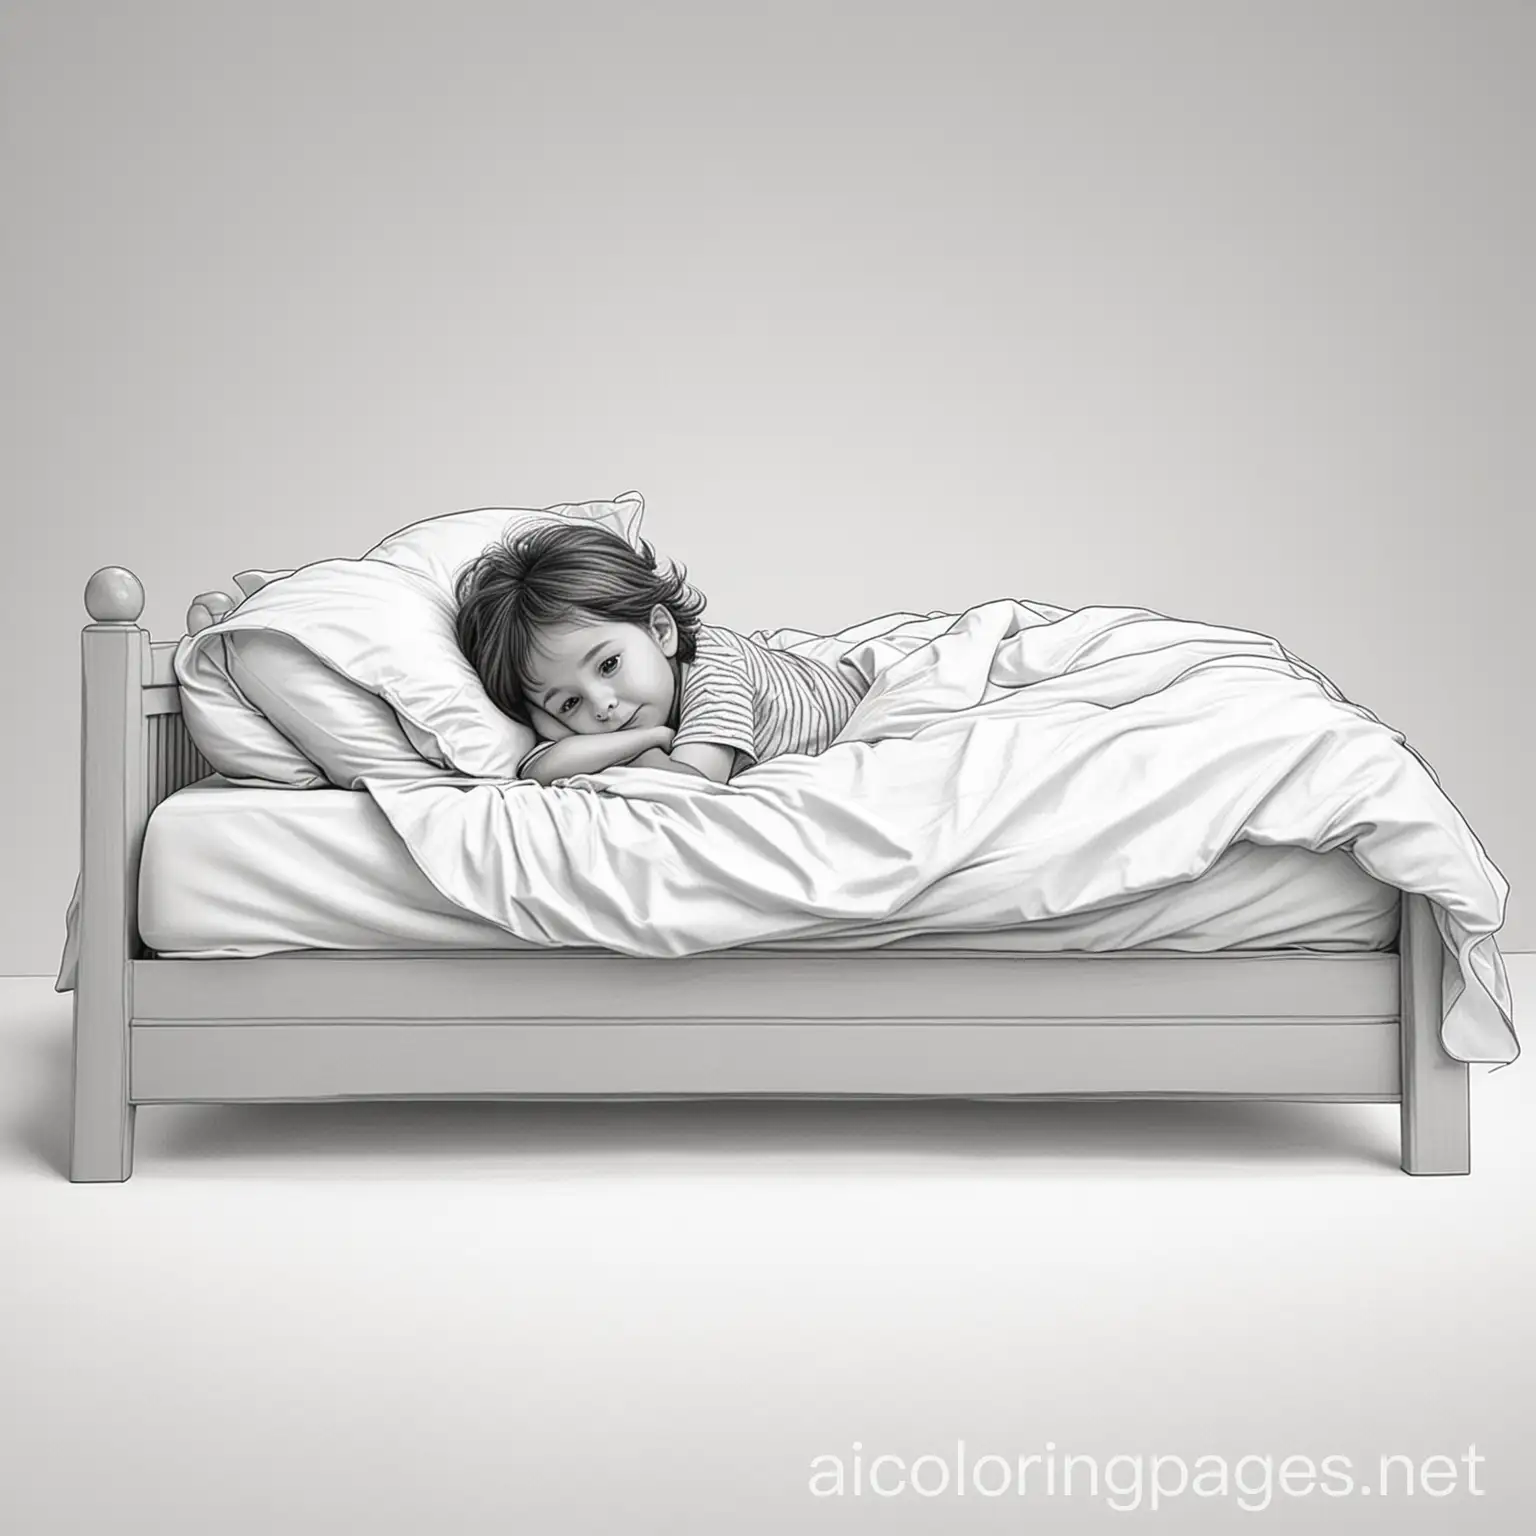 a child under the covers on a cartoon bed, Coloring Page, black and white, line art, white background, Simplicity, Ample White Space